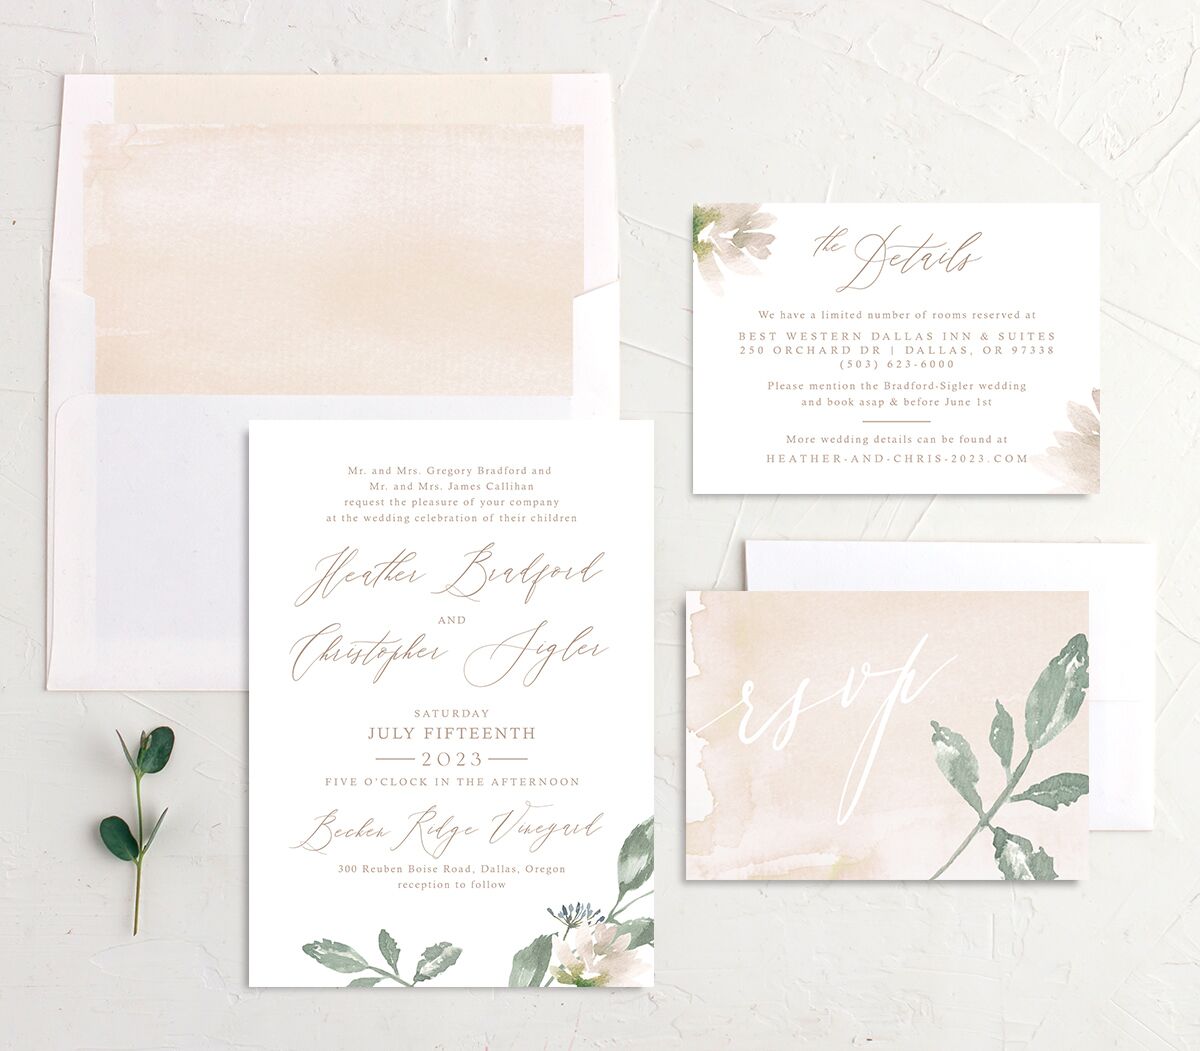 Watercolor Floral Wedding Invitations suite in Rose Pink